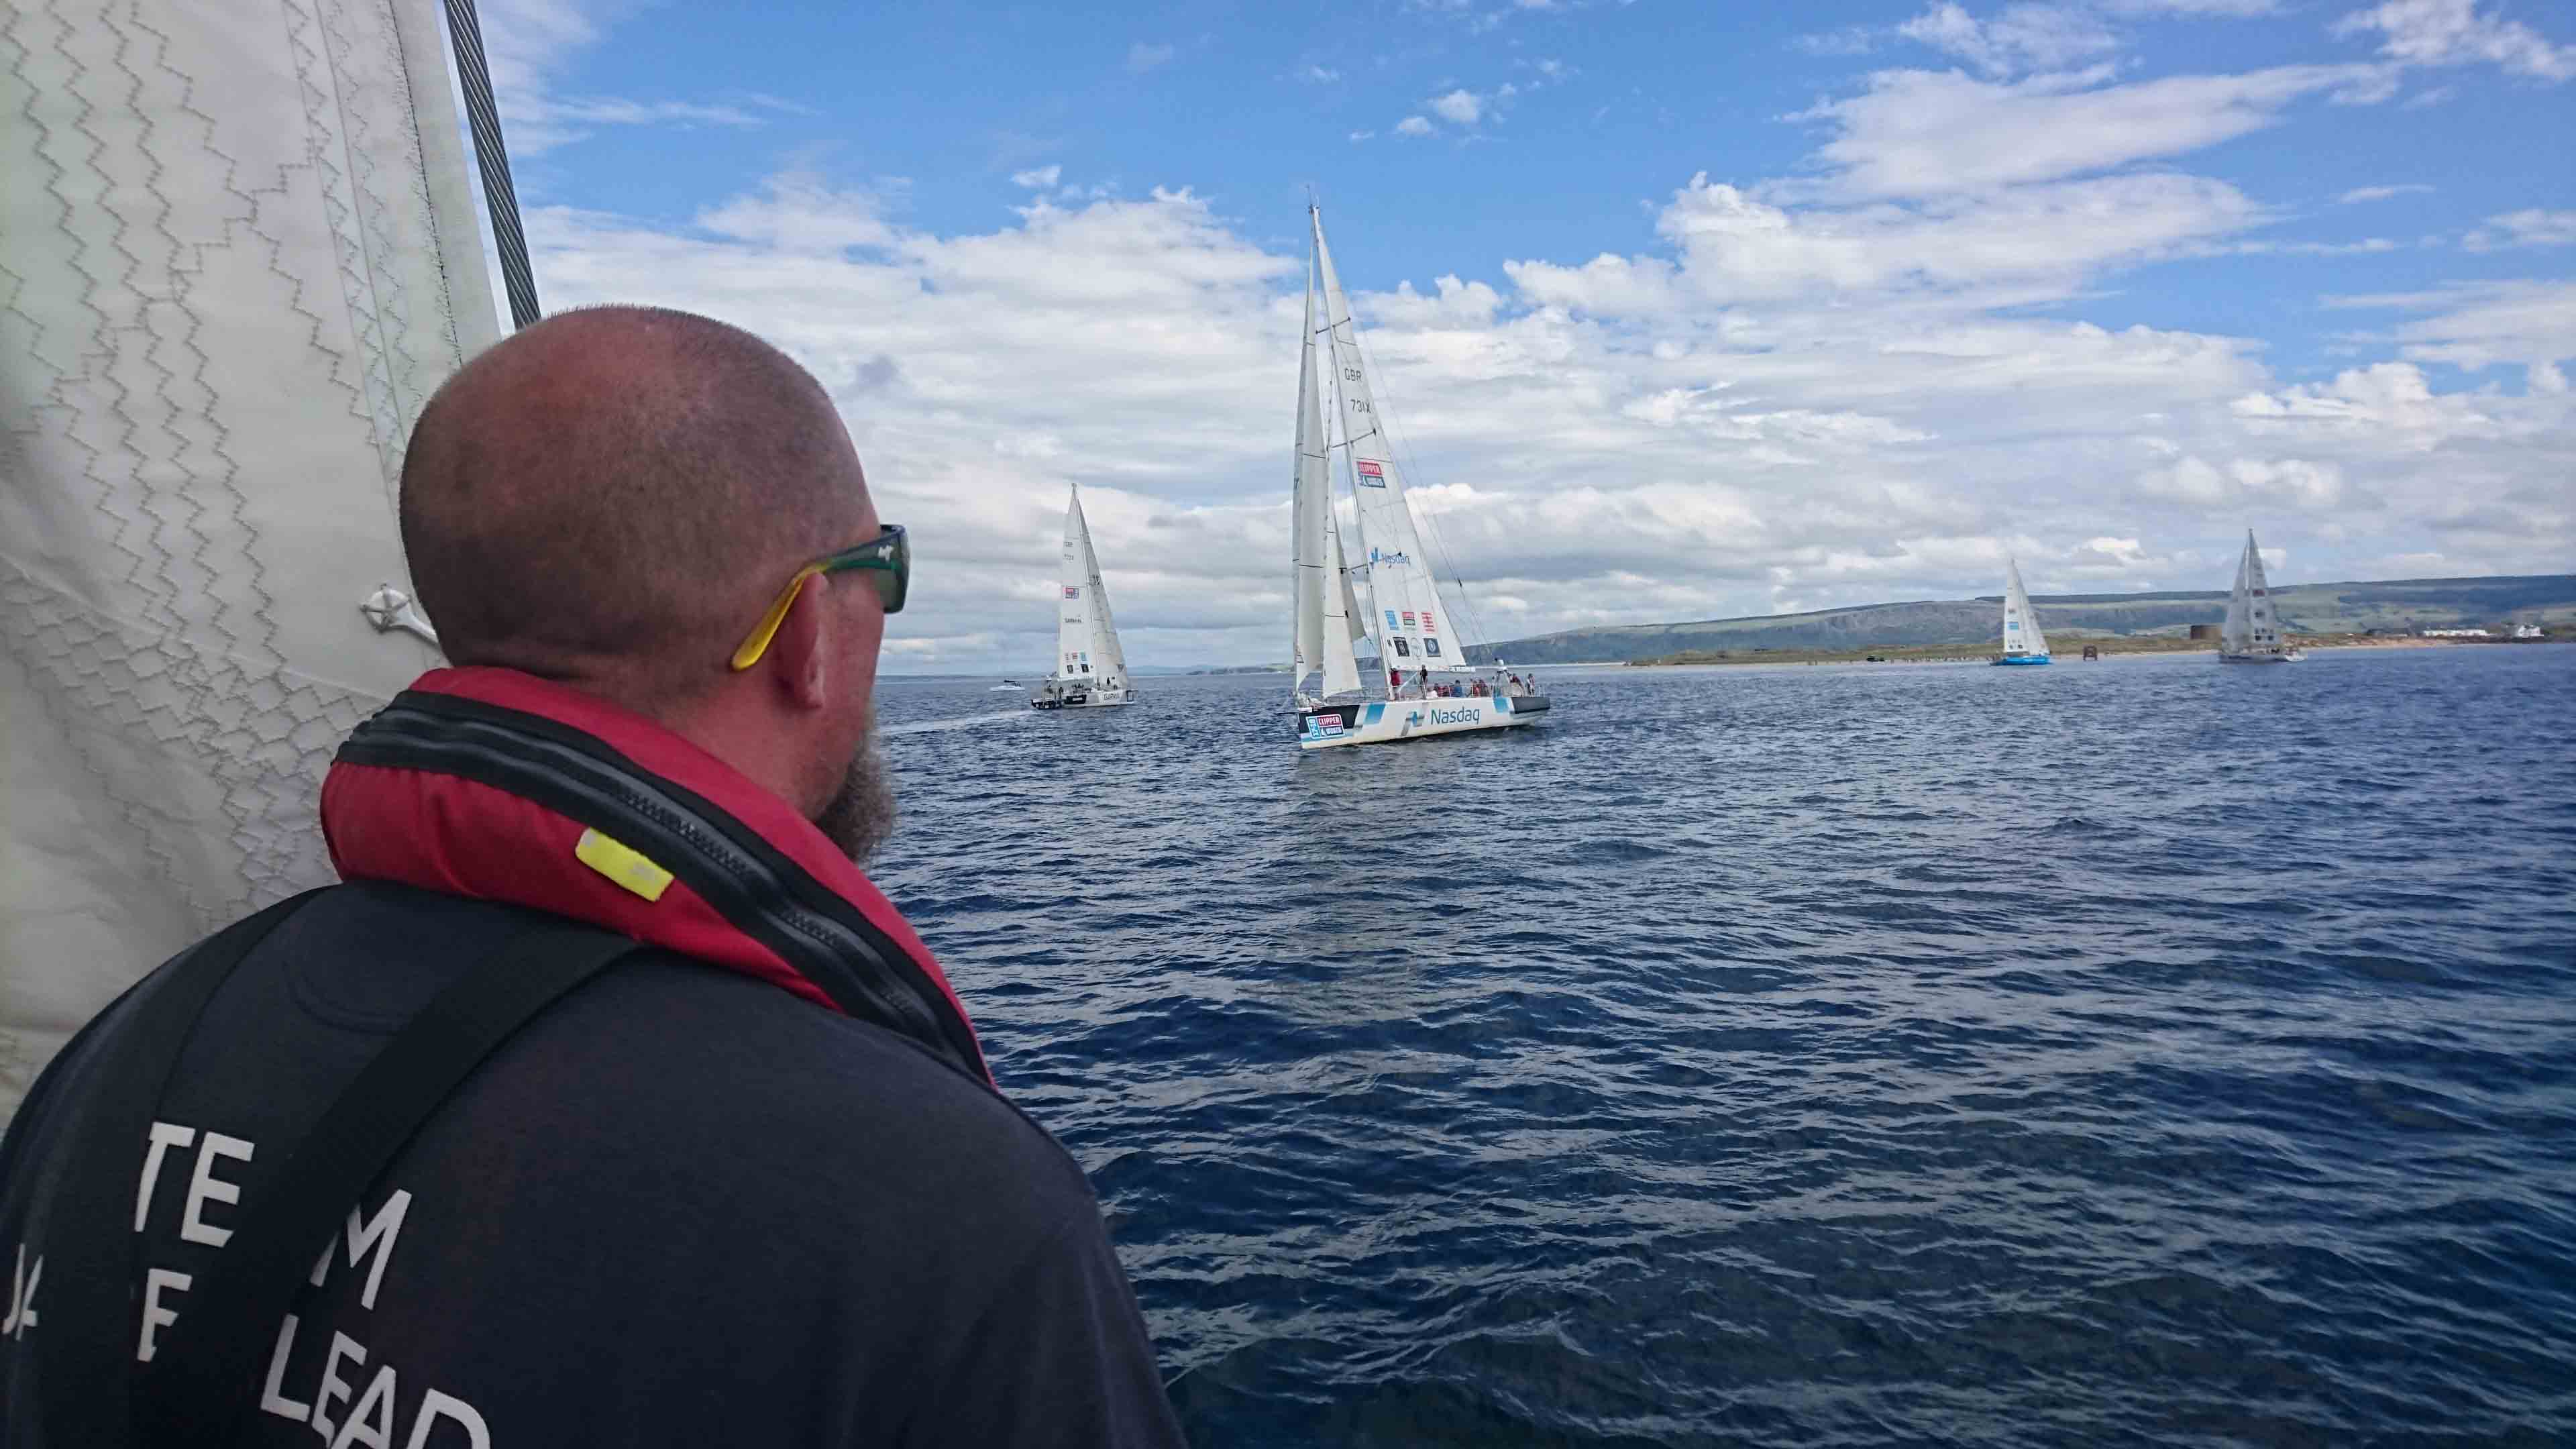 Dsre to Lead Crew Member looks out at competing yachts 